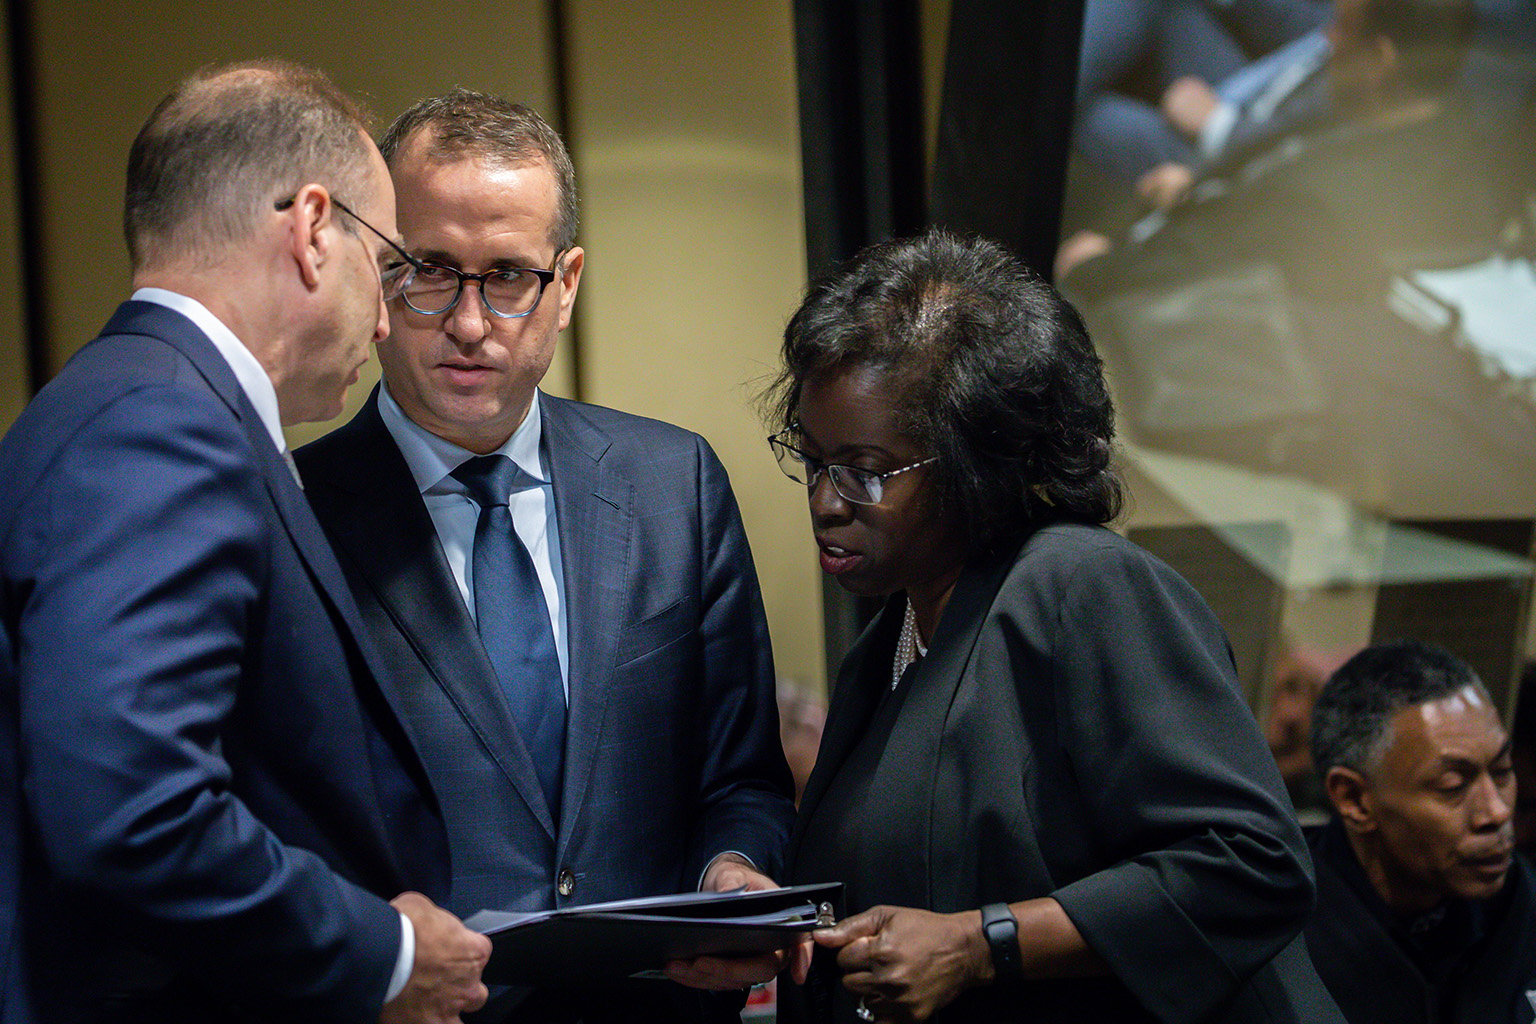 Special prosecutor Patricia Brown Holmes, right, consults with assistant special prosecutor Ron Safer, left, and Brian Watson, center, on Thursday, Dec. 6, 2018. (Zbigniew Bzdak / Chicago Tribune / Pool)